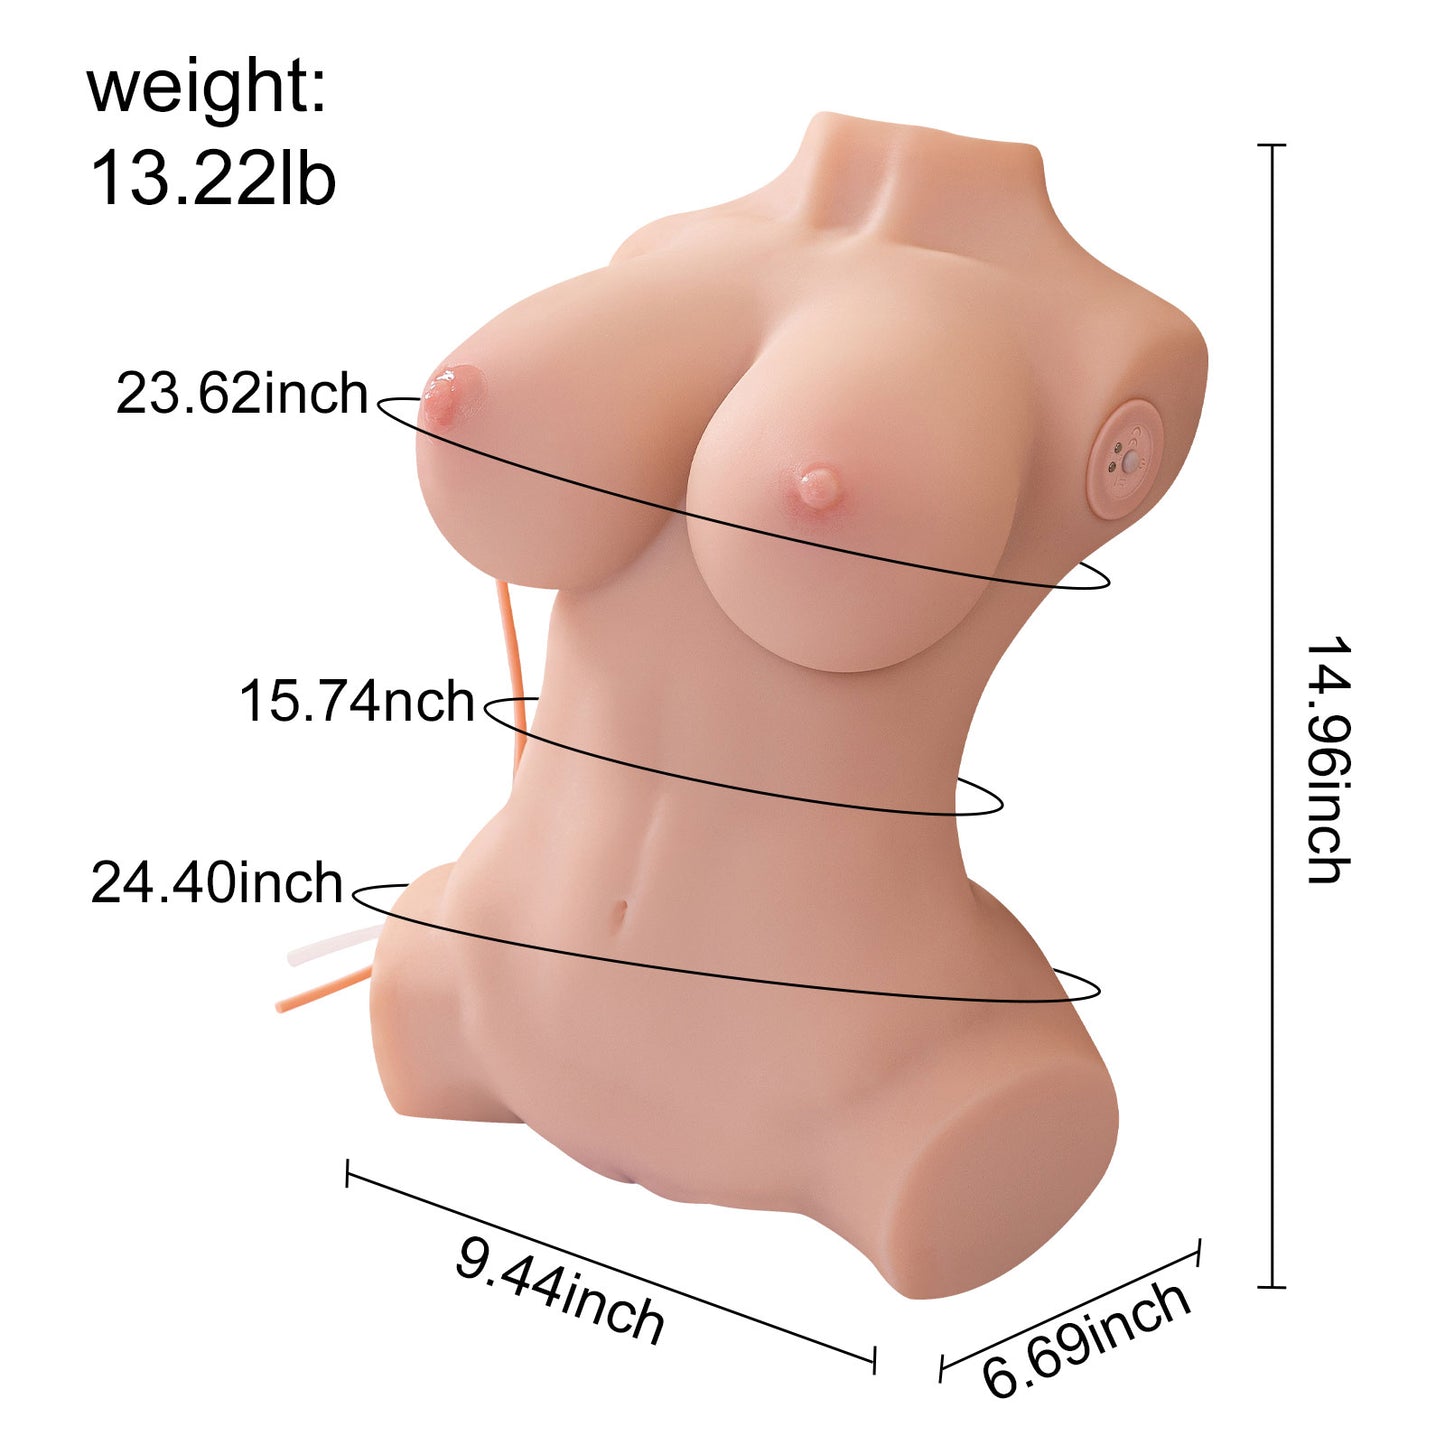 Laura suck and vibrate doll 6.8KG